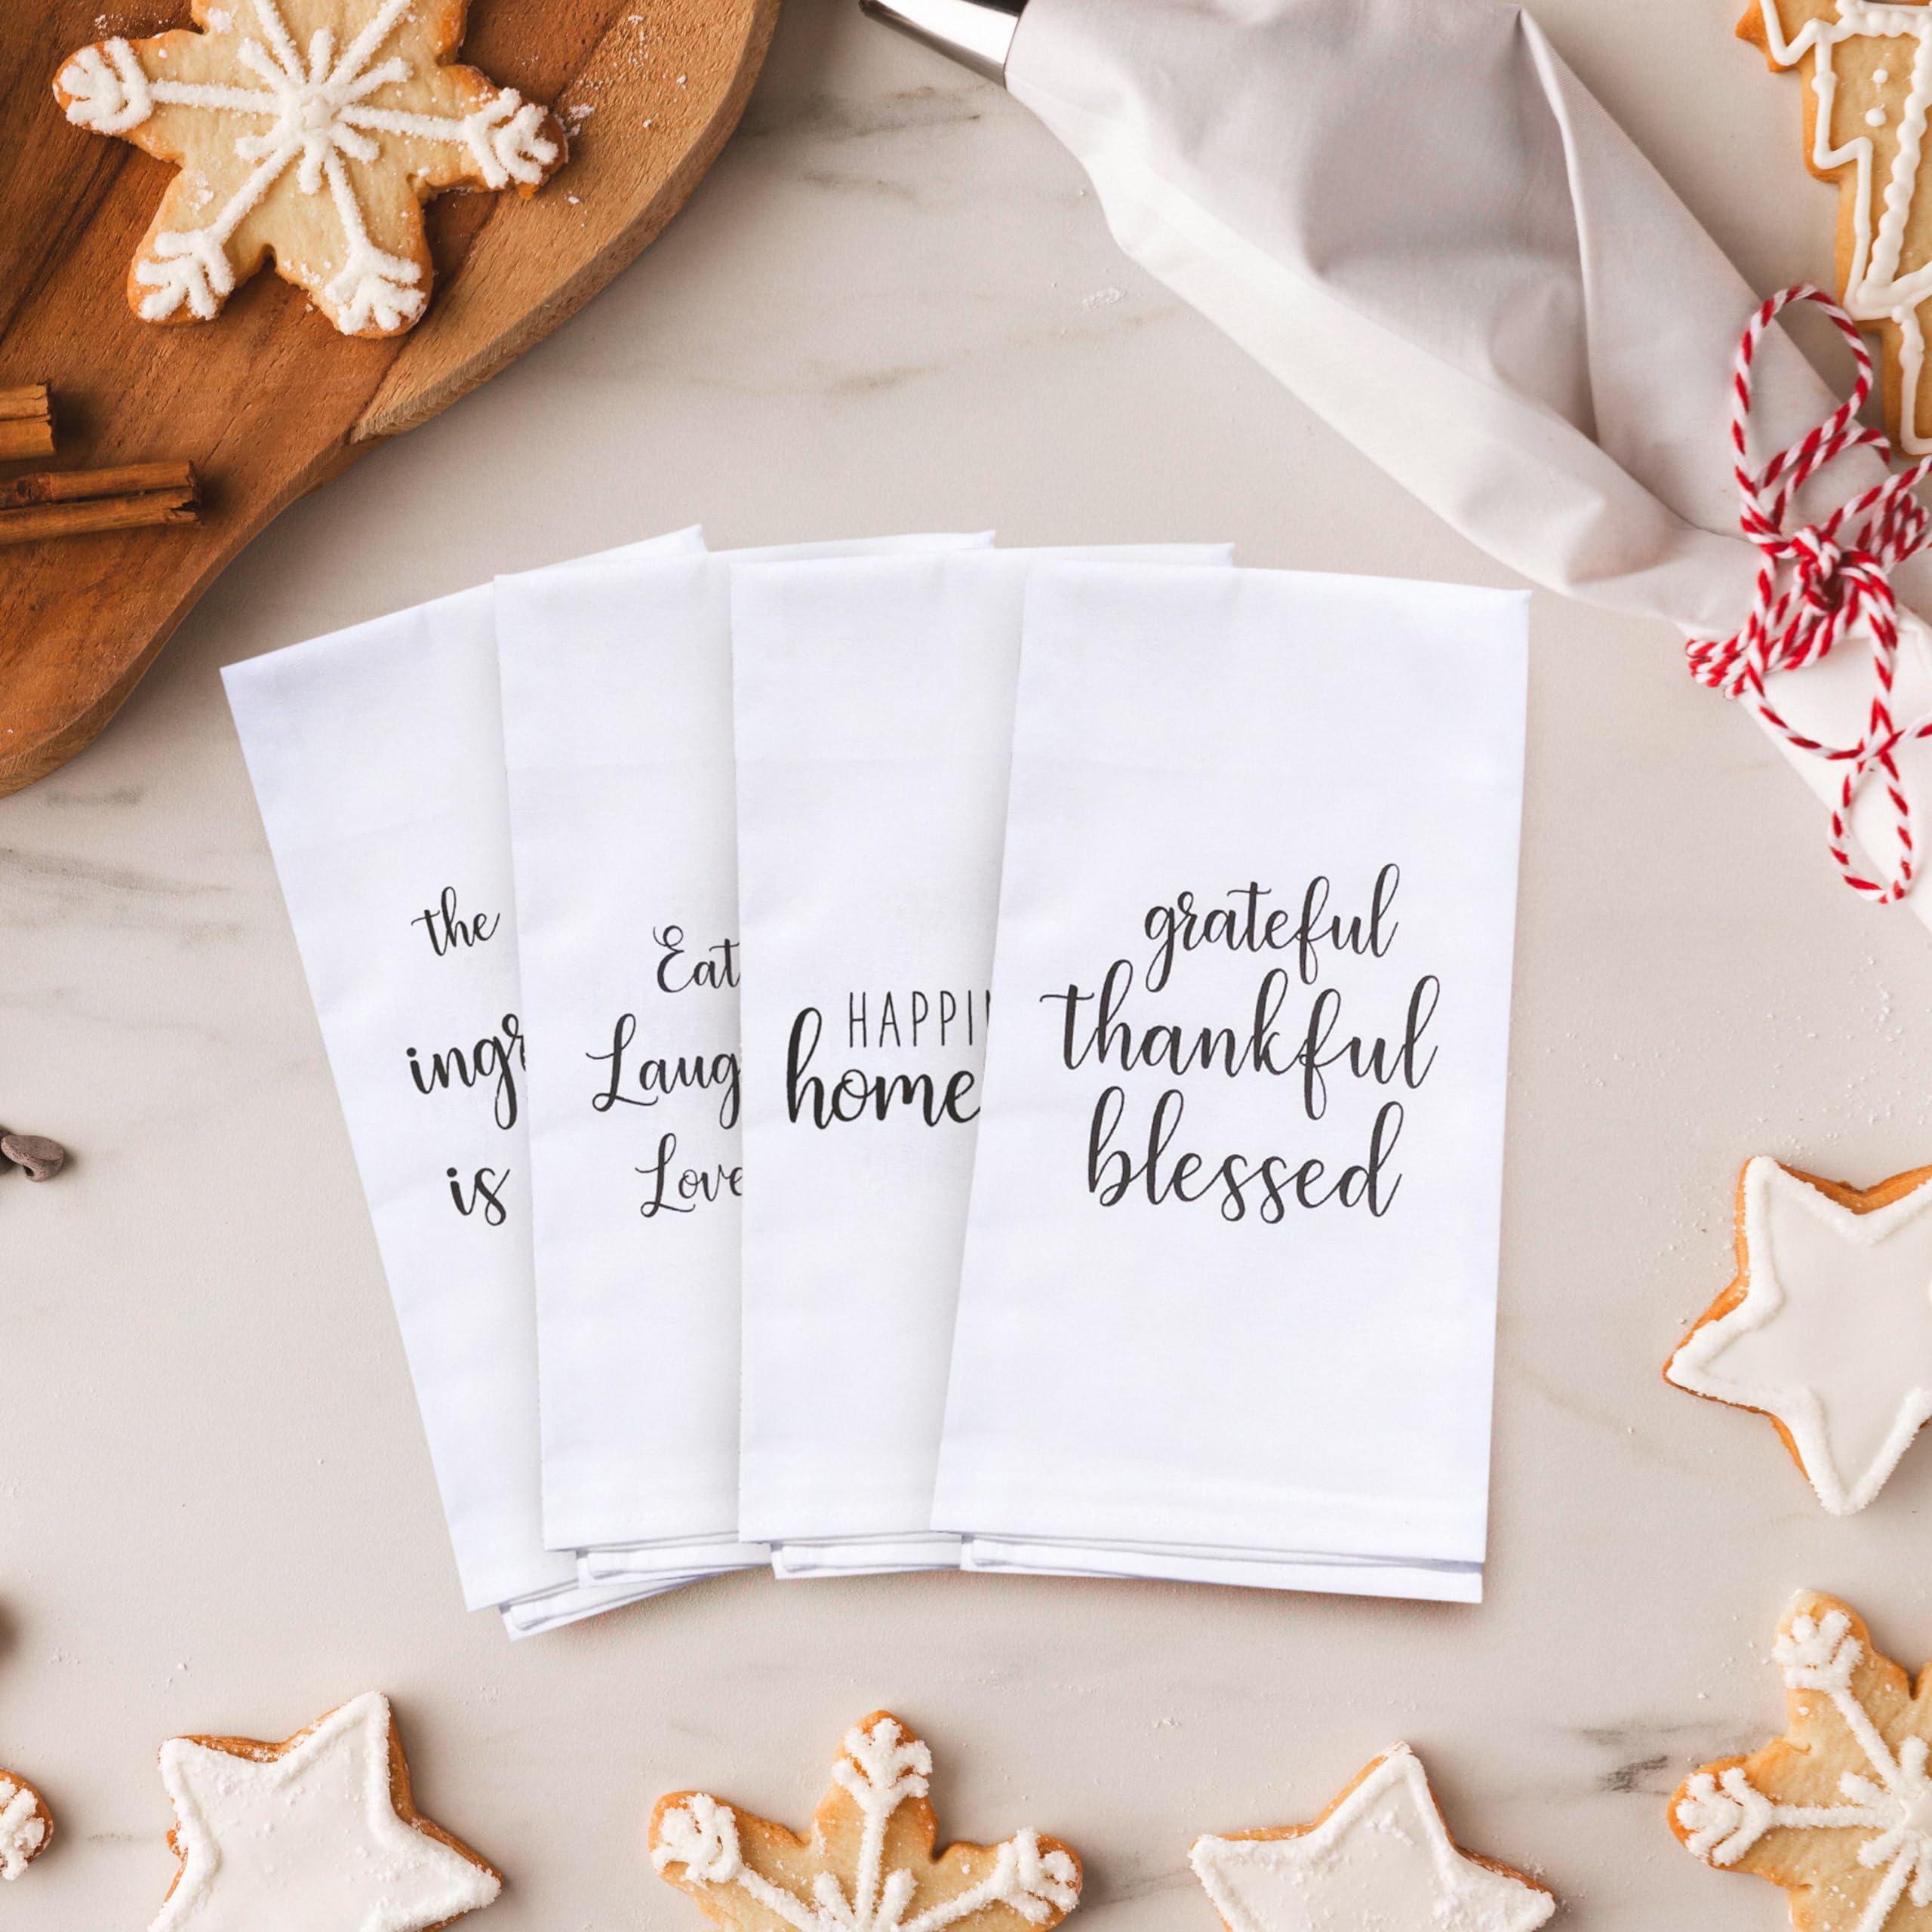 Michael Grace Gifts Decorative Kitchen Towels - Cute Kitchen Towels with Sayings, Cute Tea Towels for Kitchen, Cute Dish Towels, Perfect for Housewarming Gift Christmas Mothers Day Birthday